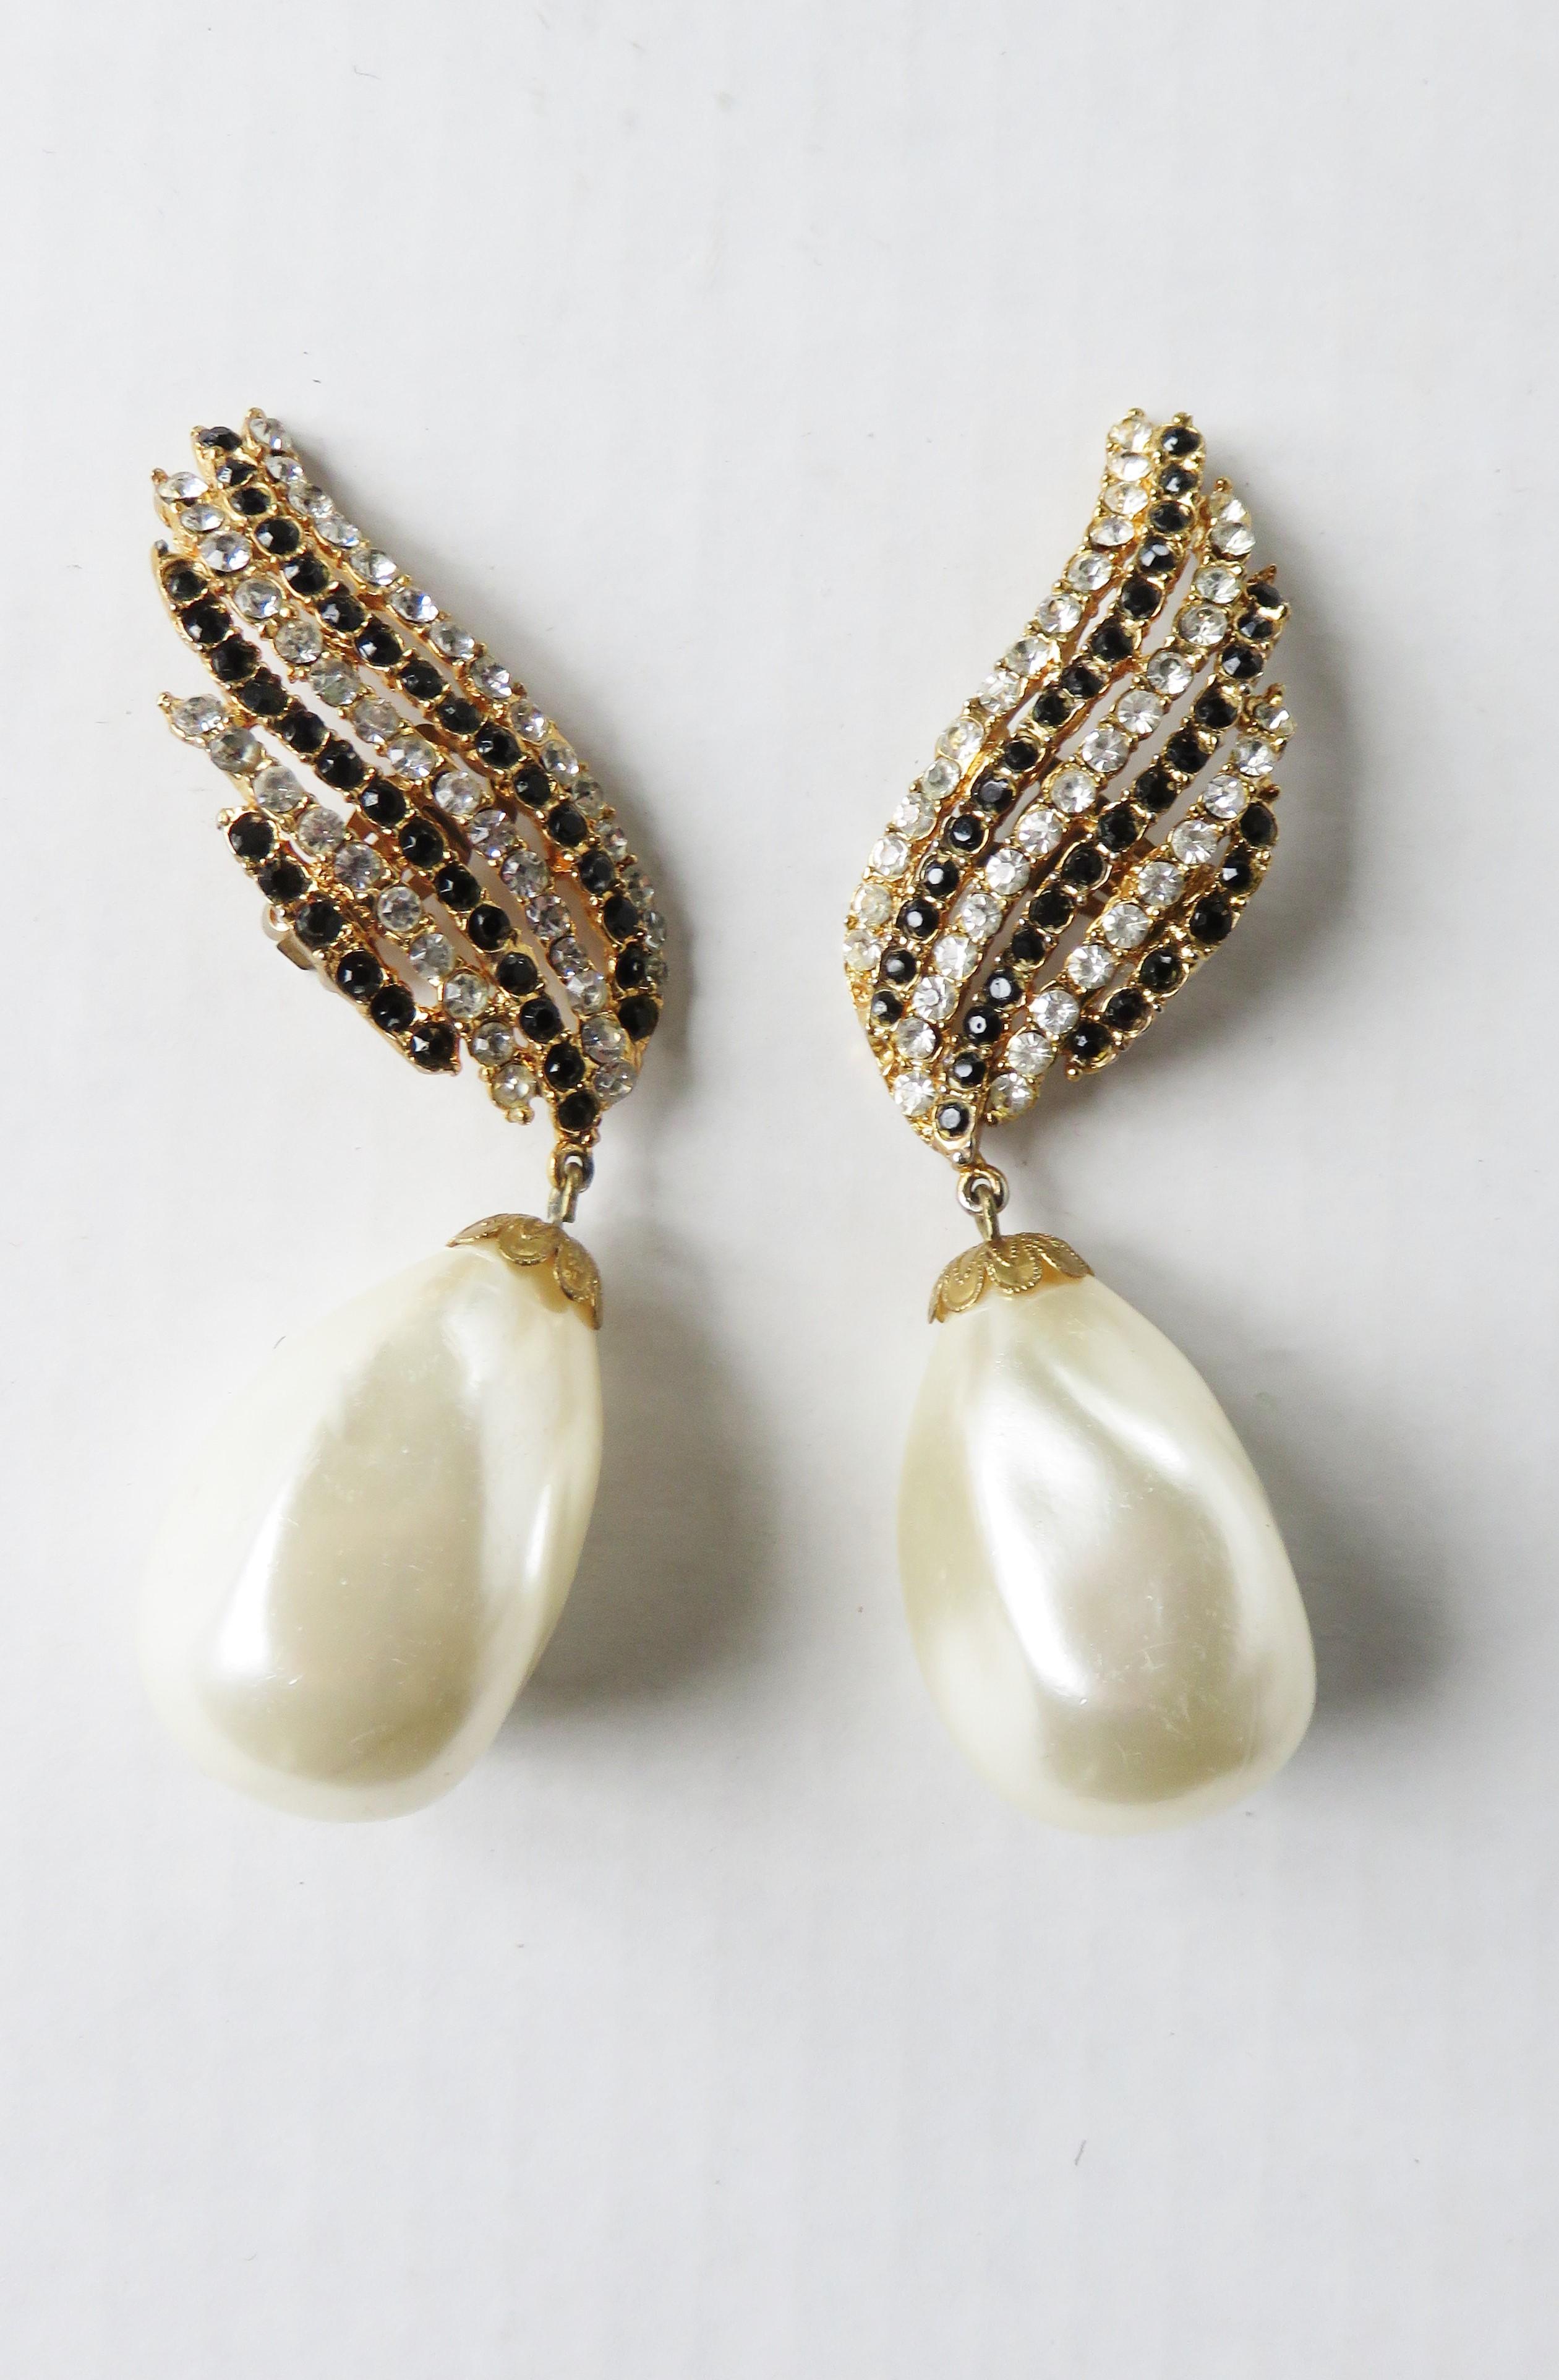 Fabulous alternately red and clear rows of crystals winged clip on earrings with a giant faux pearl dangles from 1983.  Worn on a Cosmopolitan Cover by model Paulina Poritzcova and Diana Vreeland. 

Pearl  1.50